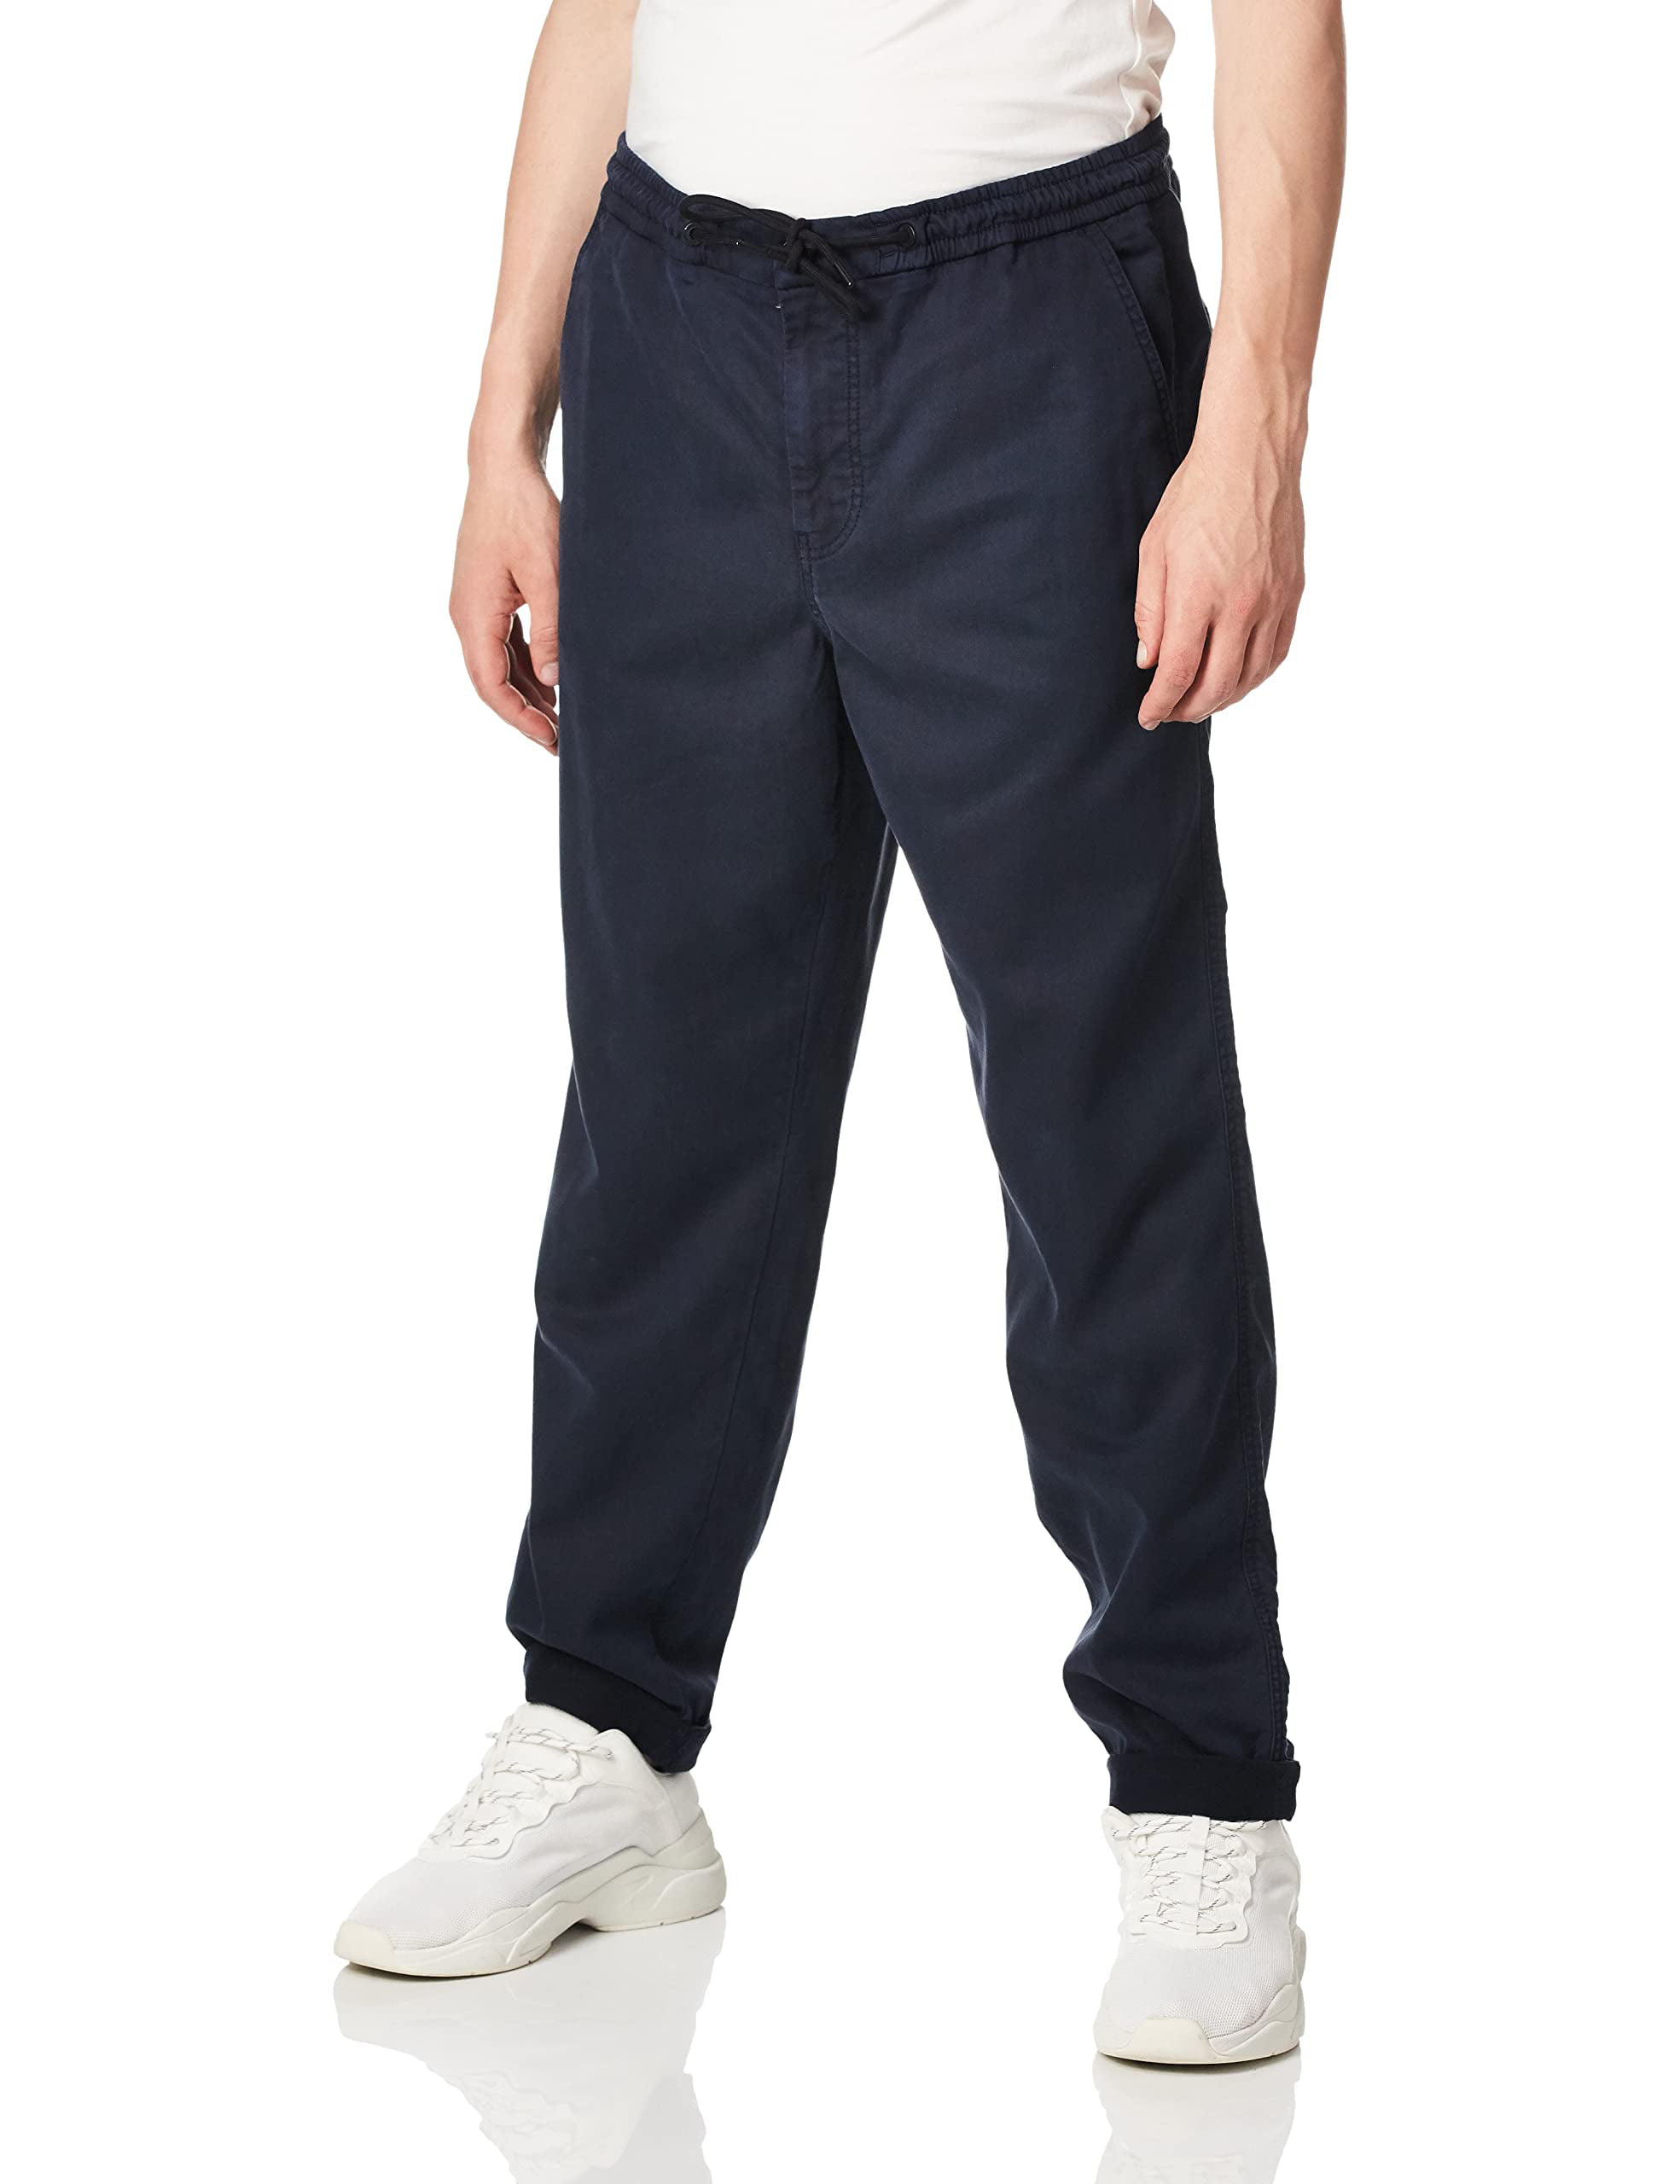 Buy HUGO BOSS Grey Pleated Stretch Casual Pants at Redfynd